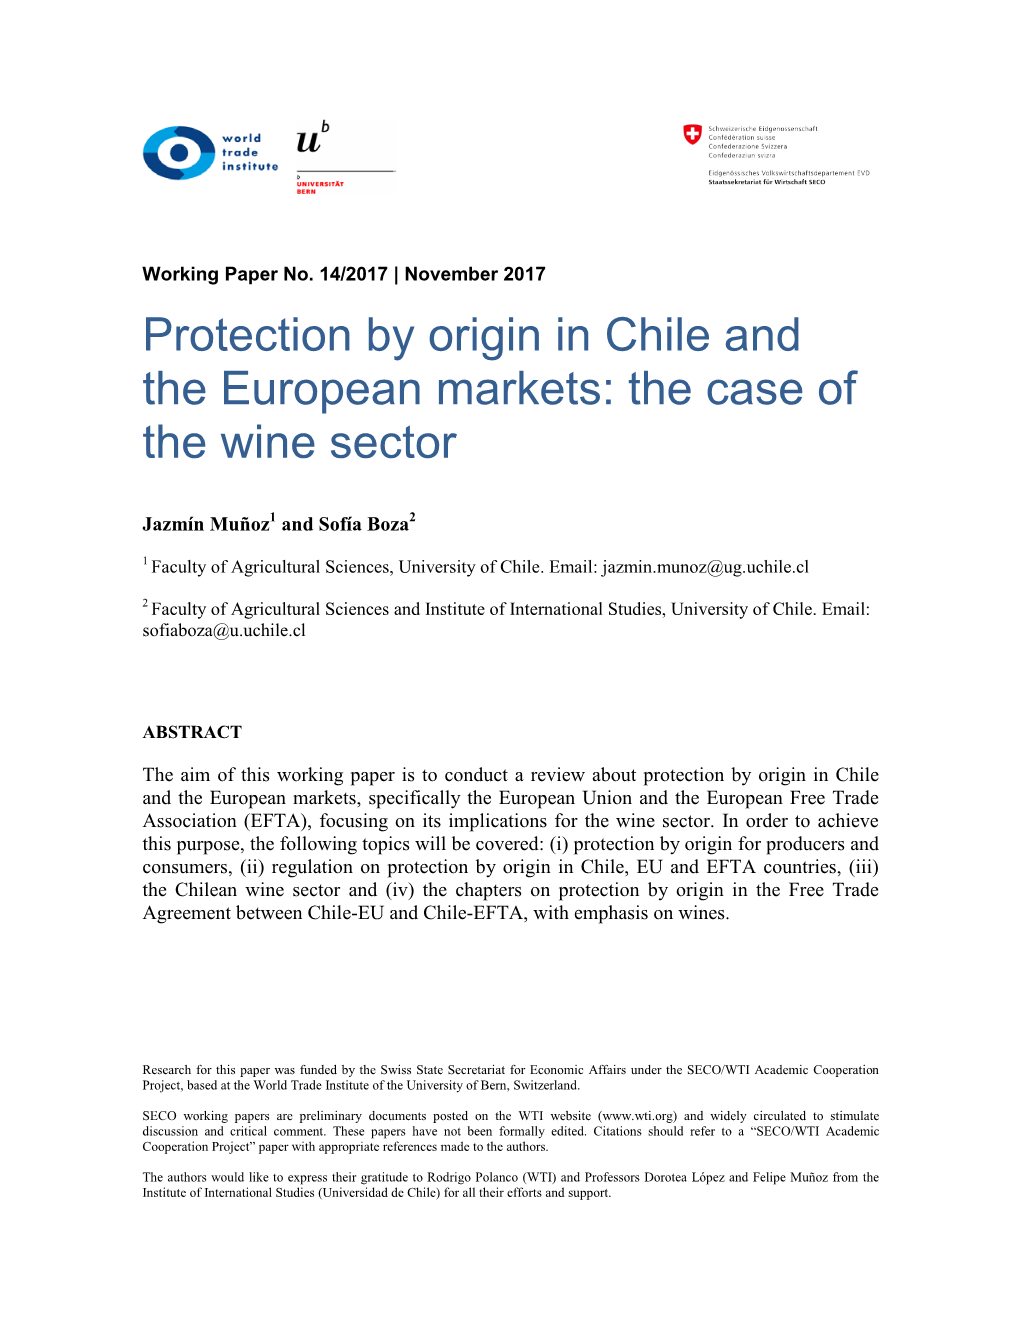 Protection by Origin in Chile and the European Markets: the Case of the Wine Sector